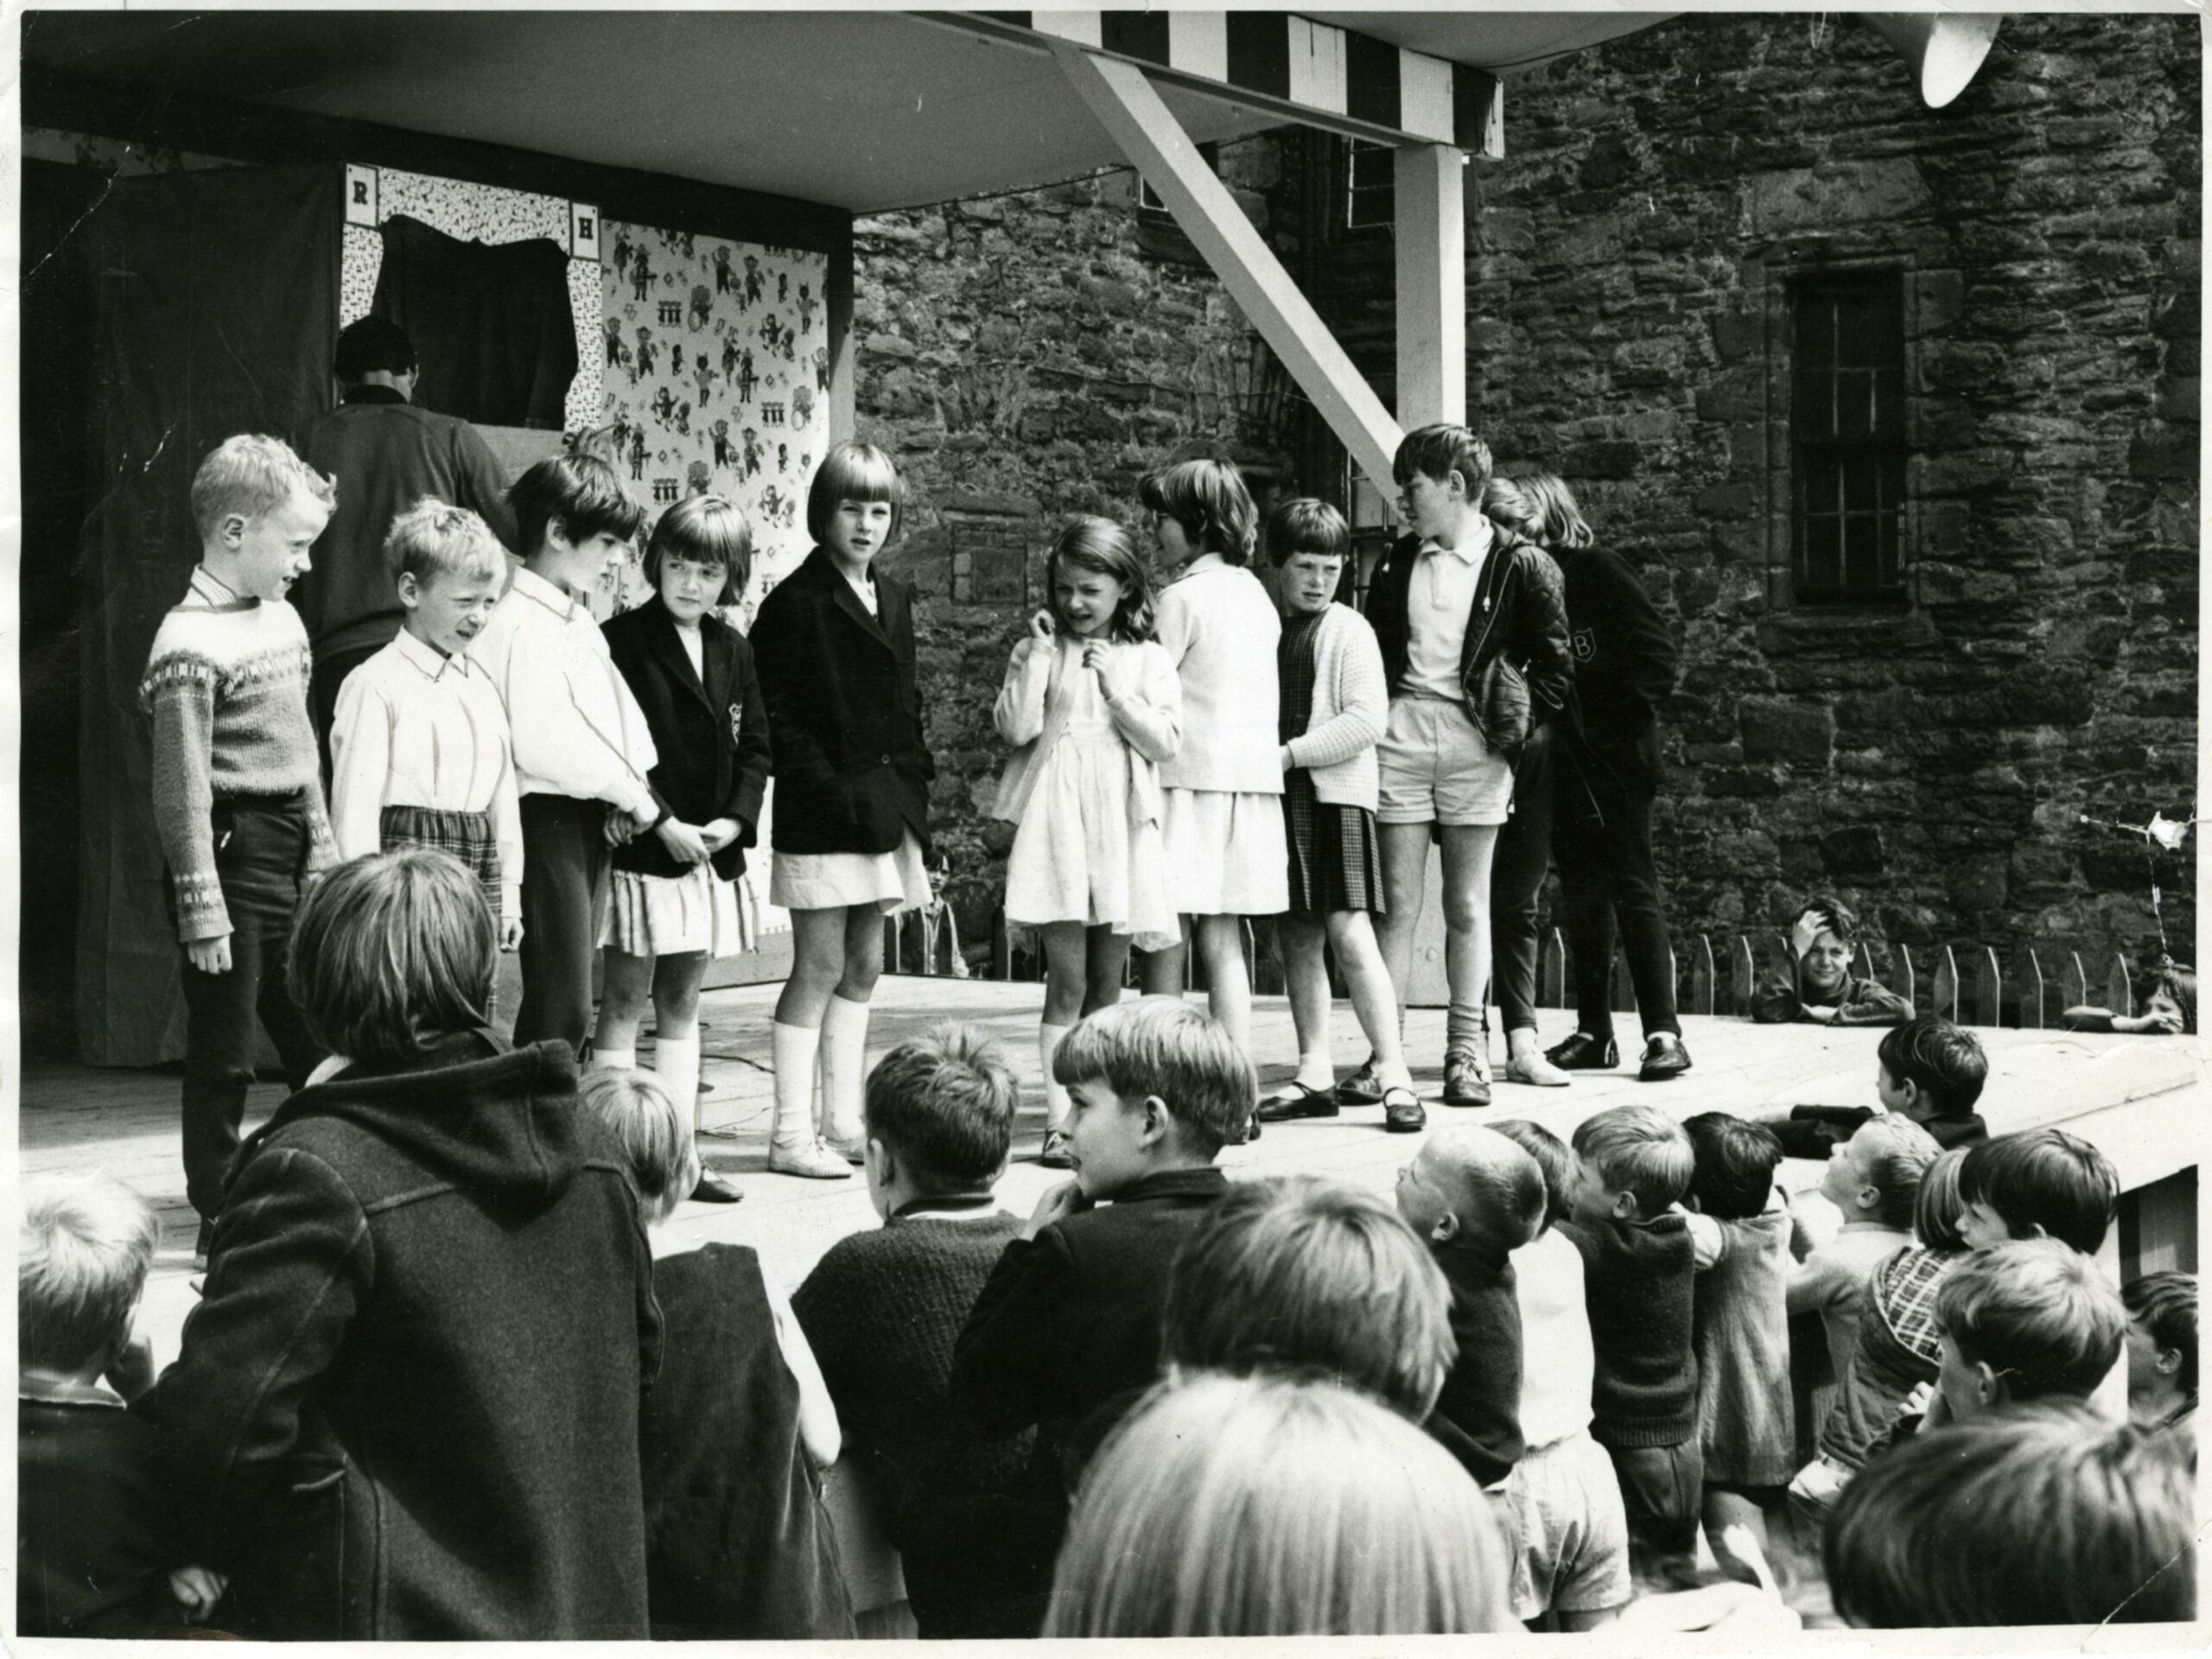 Youngsters waiting for the verdict on a stage after a summer talent show was held in 1968